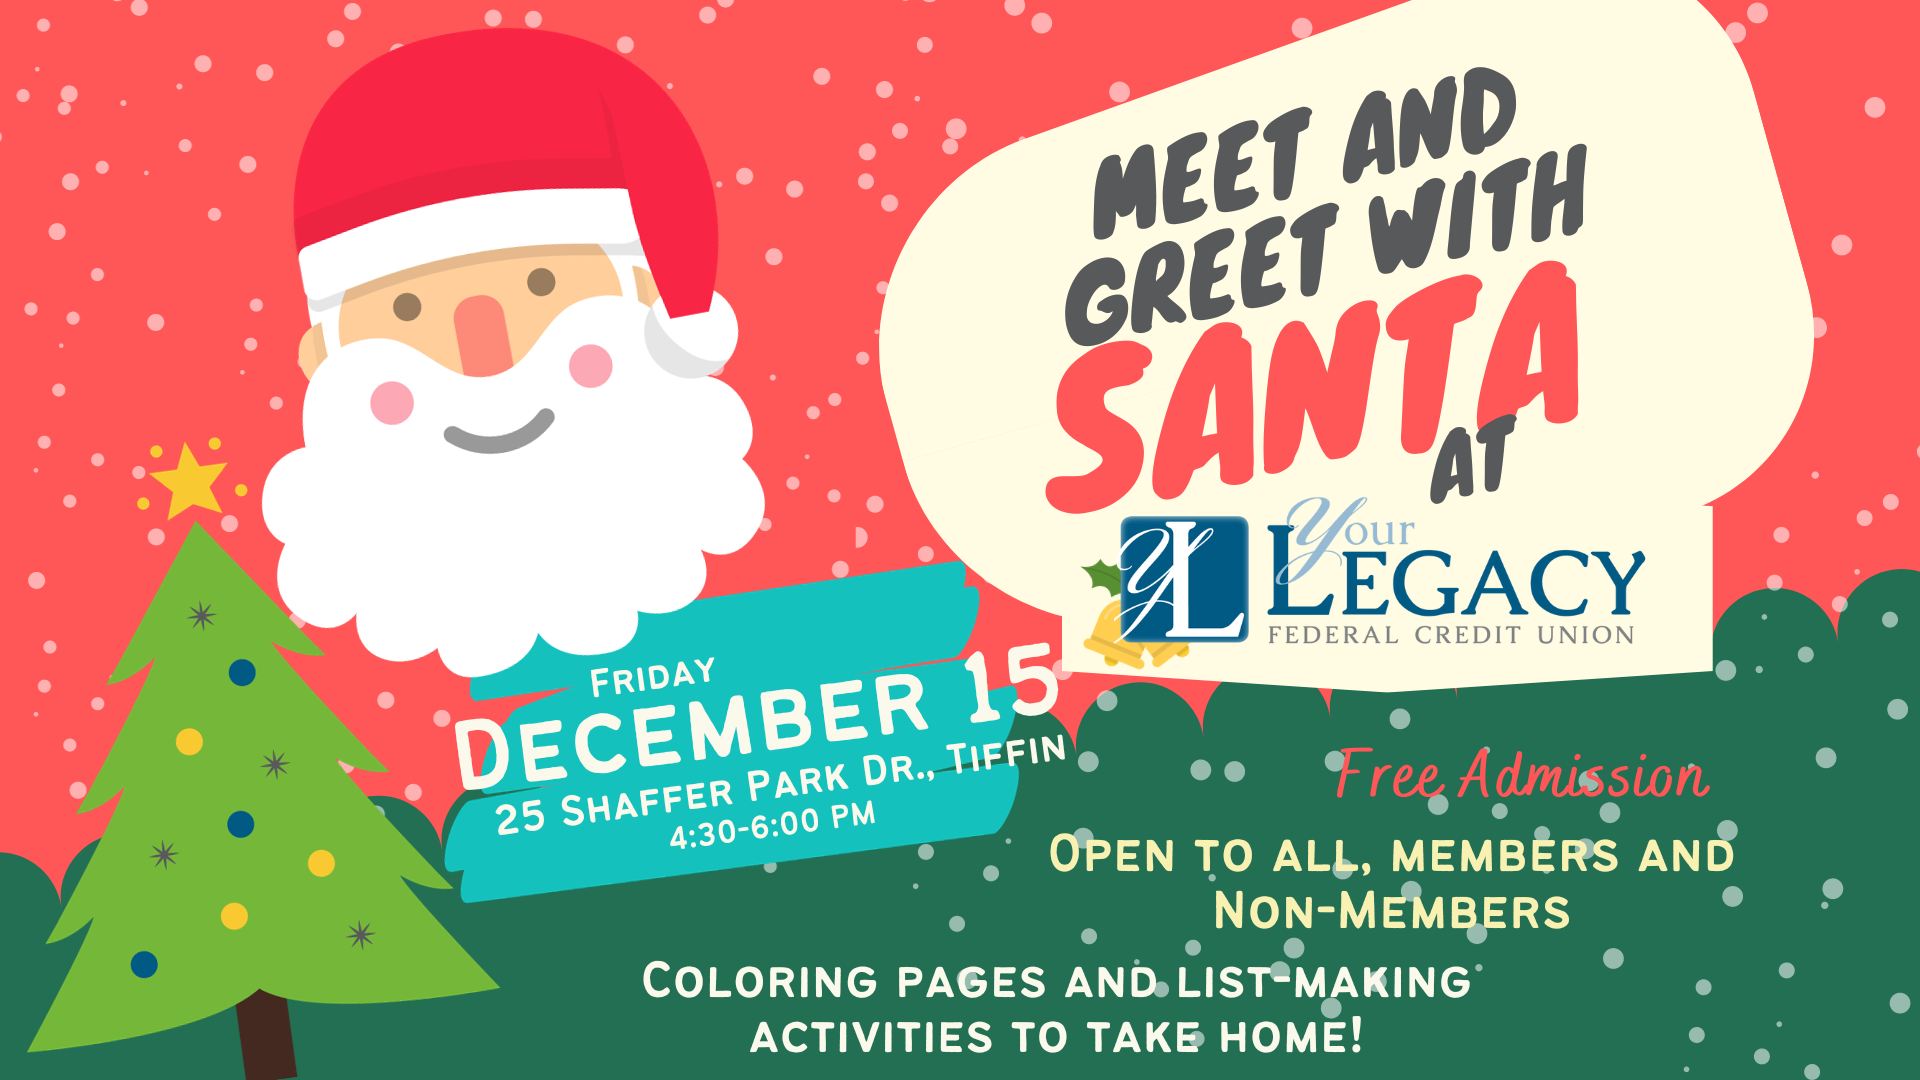 Meet and Greet with Santa at Your Legacy FCU